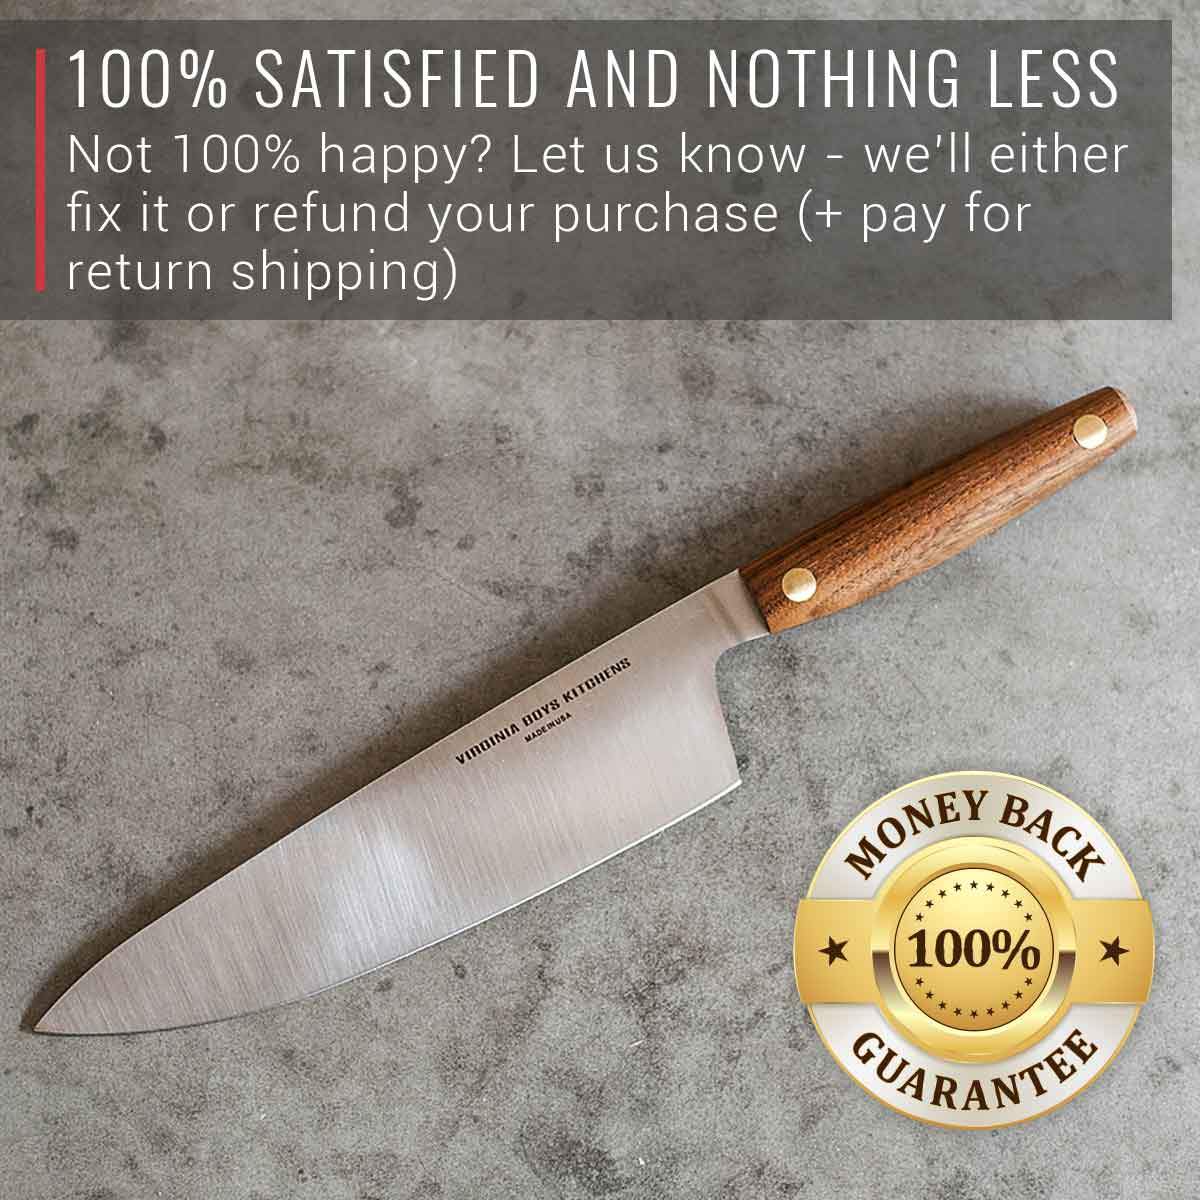 8 Inch Stainless Steel Chef Knife with Walnut Handle by Virginia Boys Kitchens